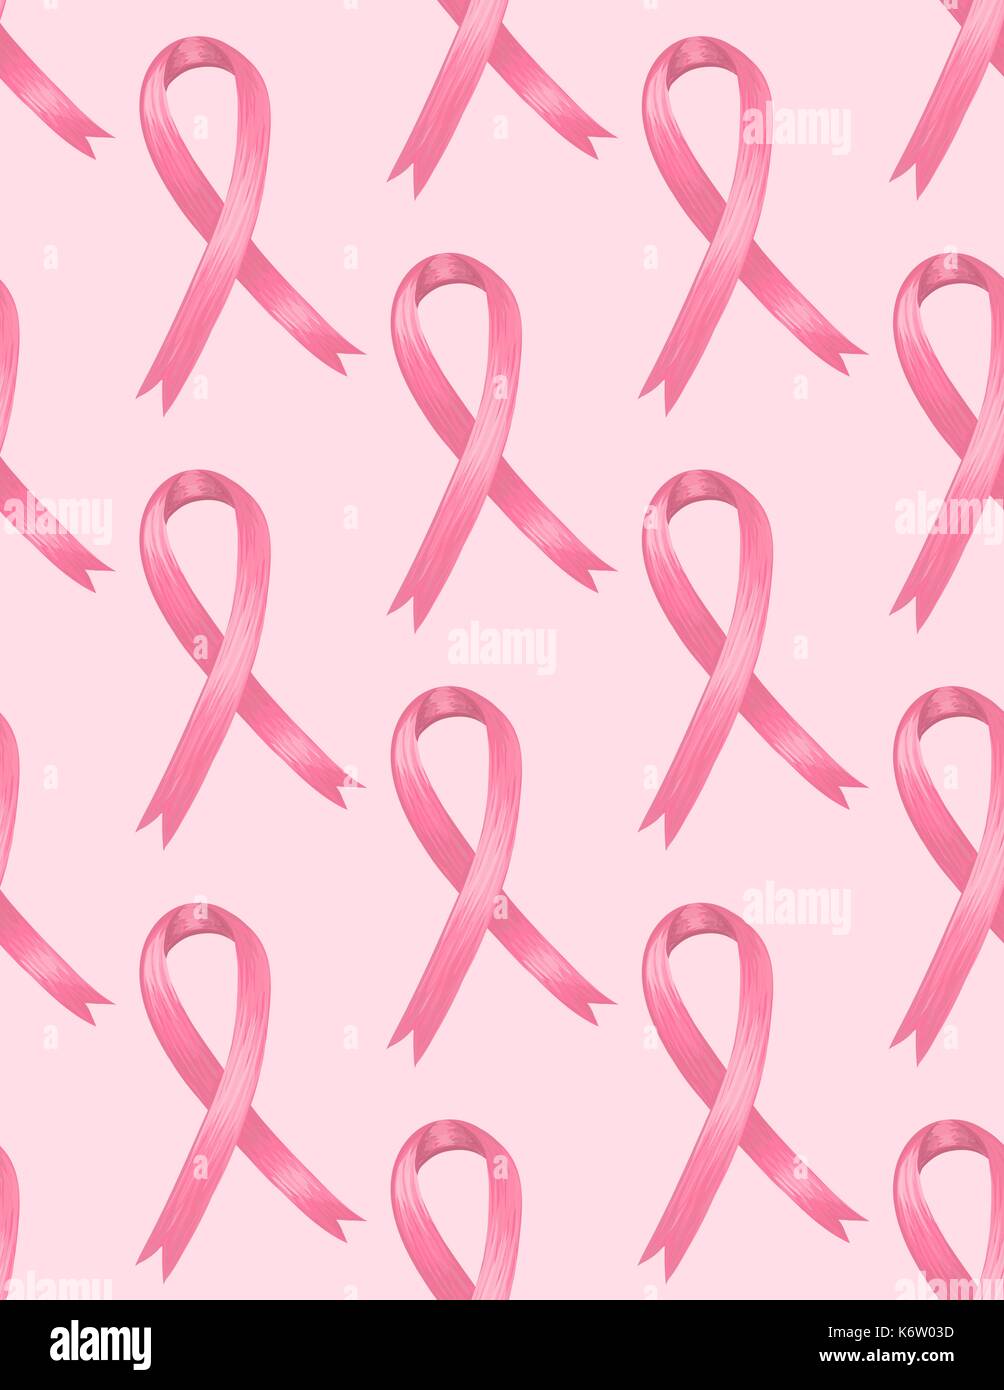 Wake County Breast Cancer Awareness Outreach Underway